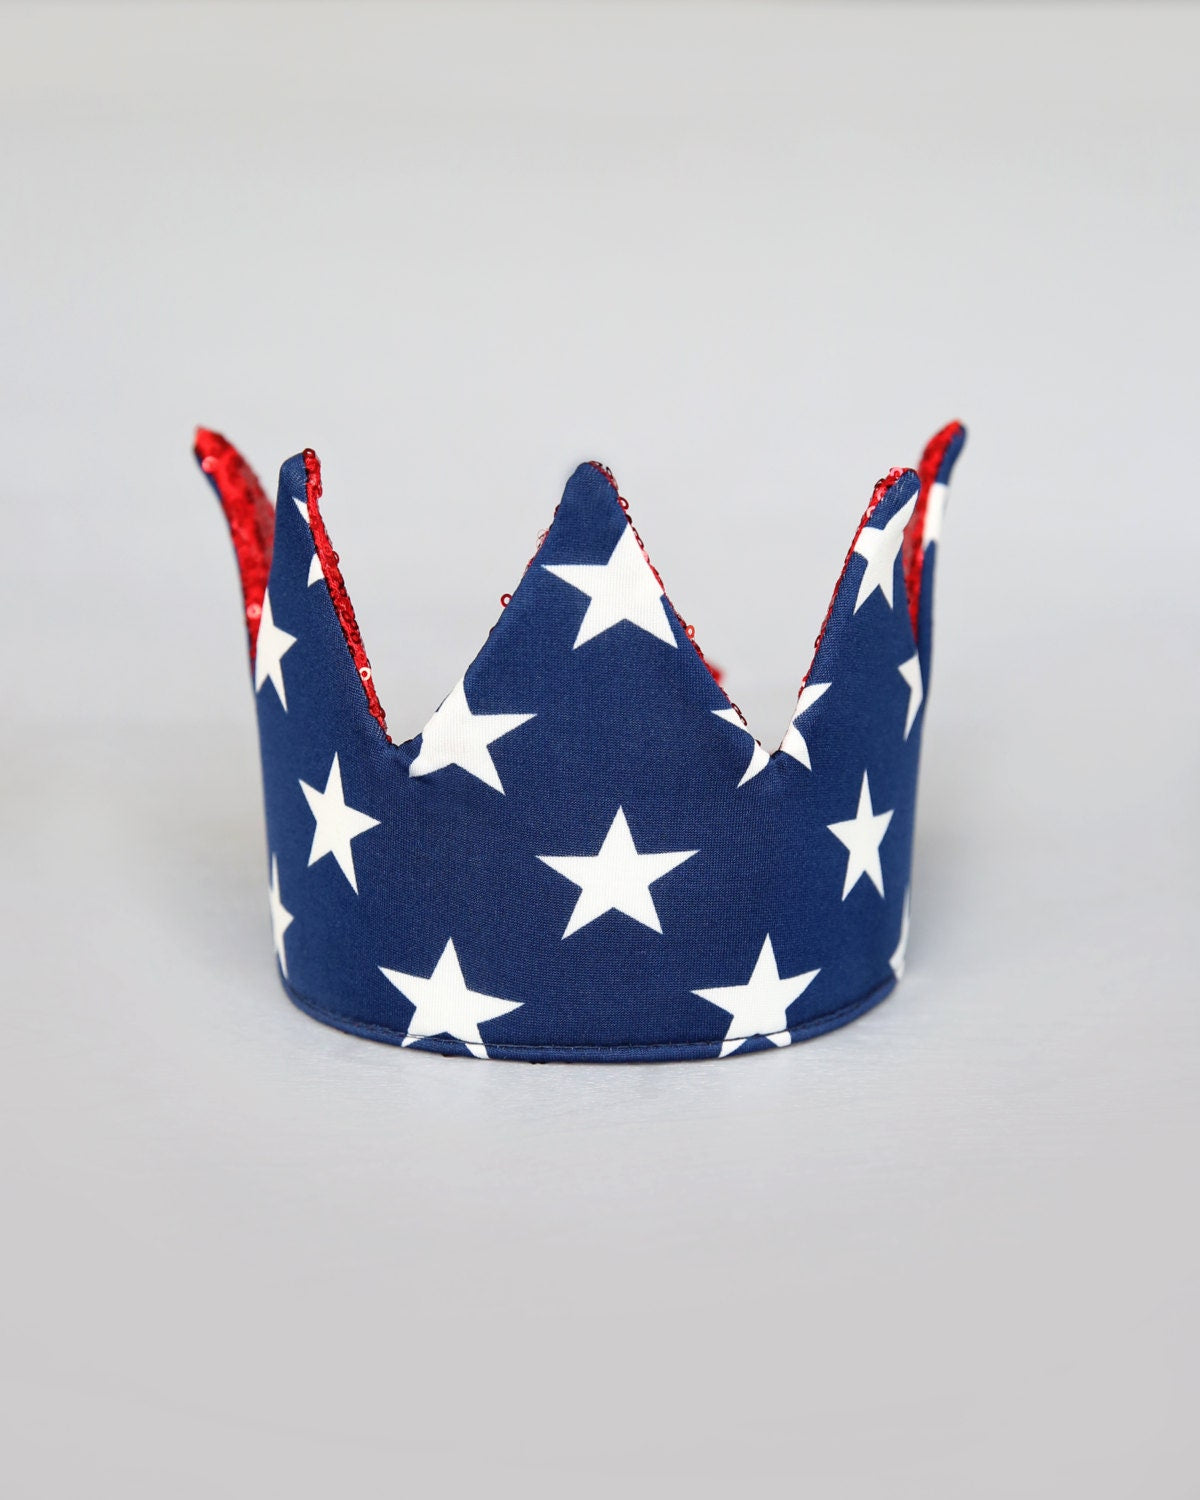 Dress Up Crown - Sequin Crown - Birthday Crown - Navy and White Stars Crown- Red Sequin Crown - Red, White and Blue Crown - Fits all